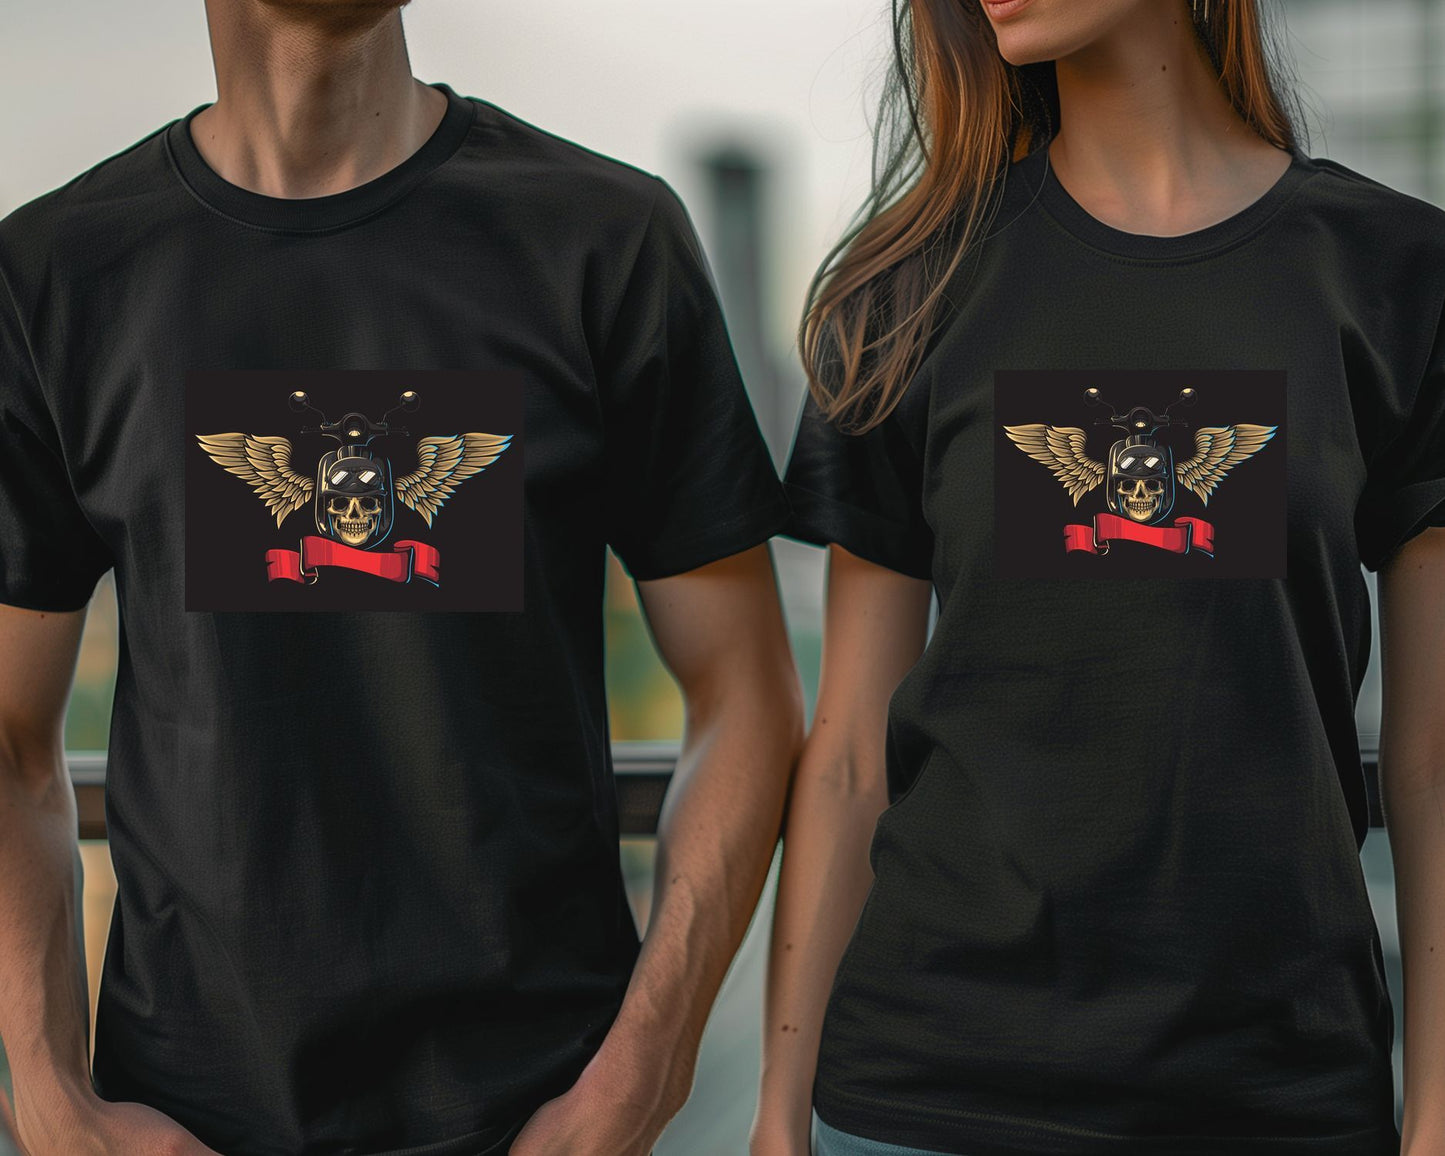 Skull and scooter illustration with wings in vintage style - @PowerUpDesign